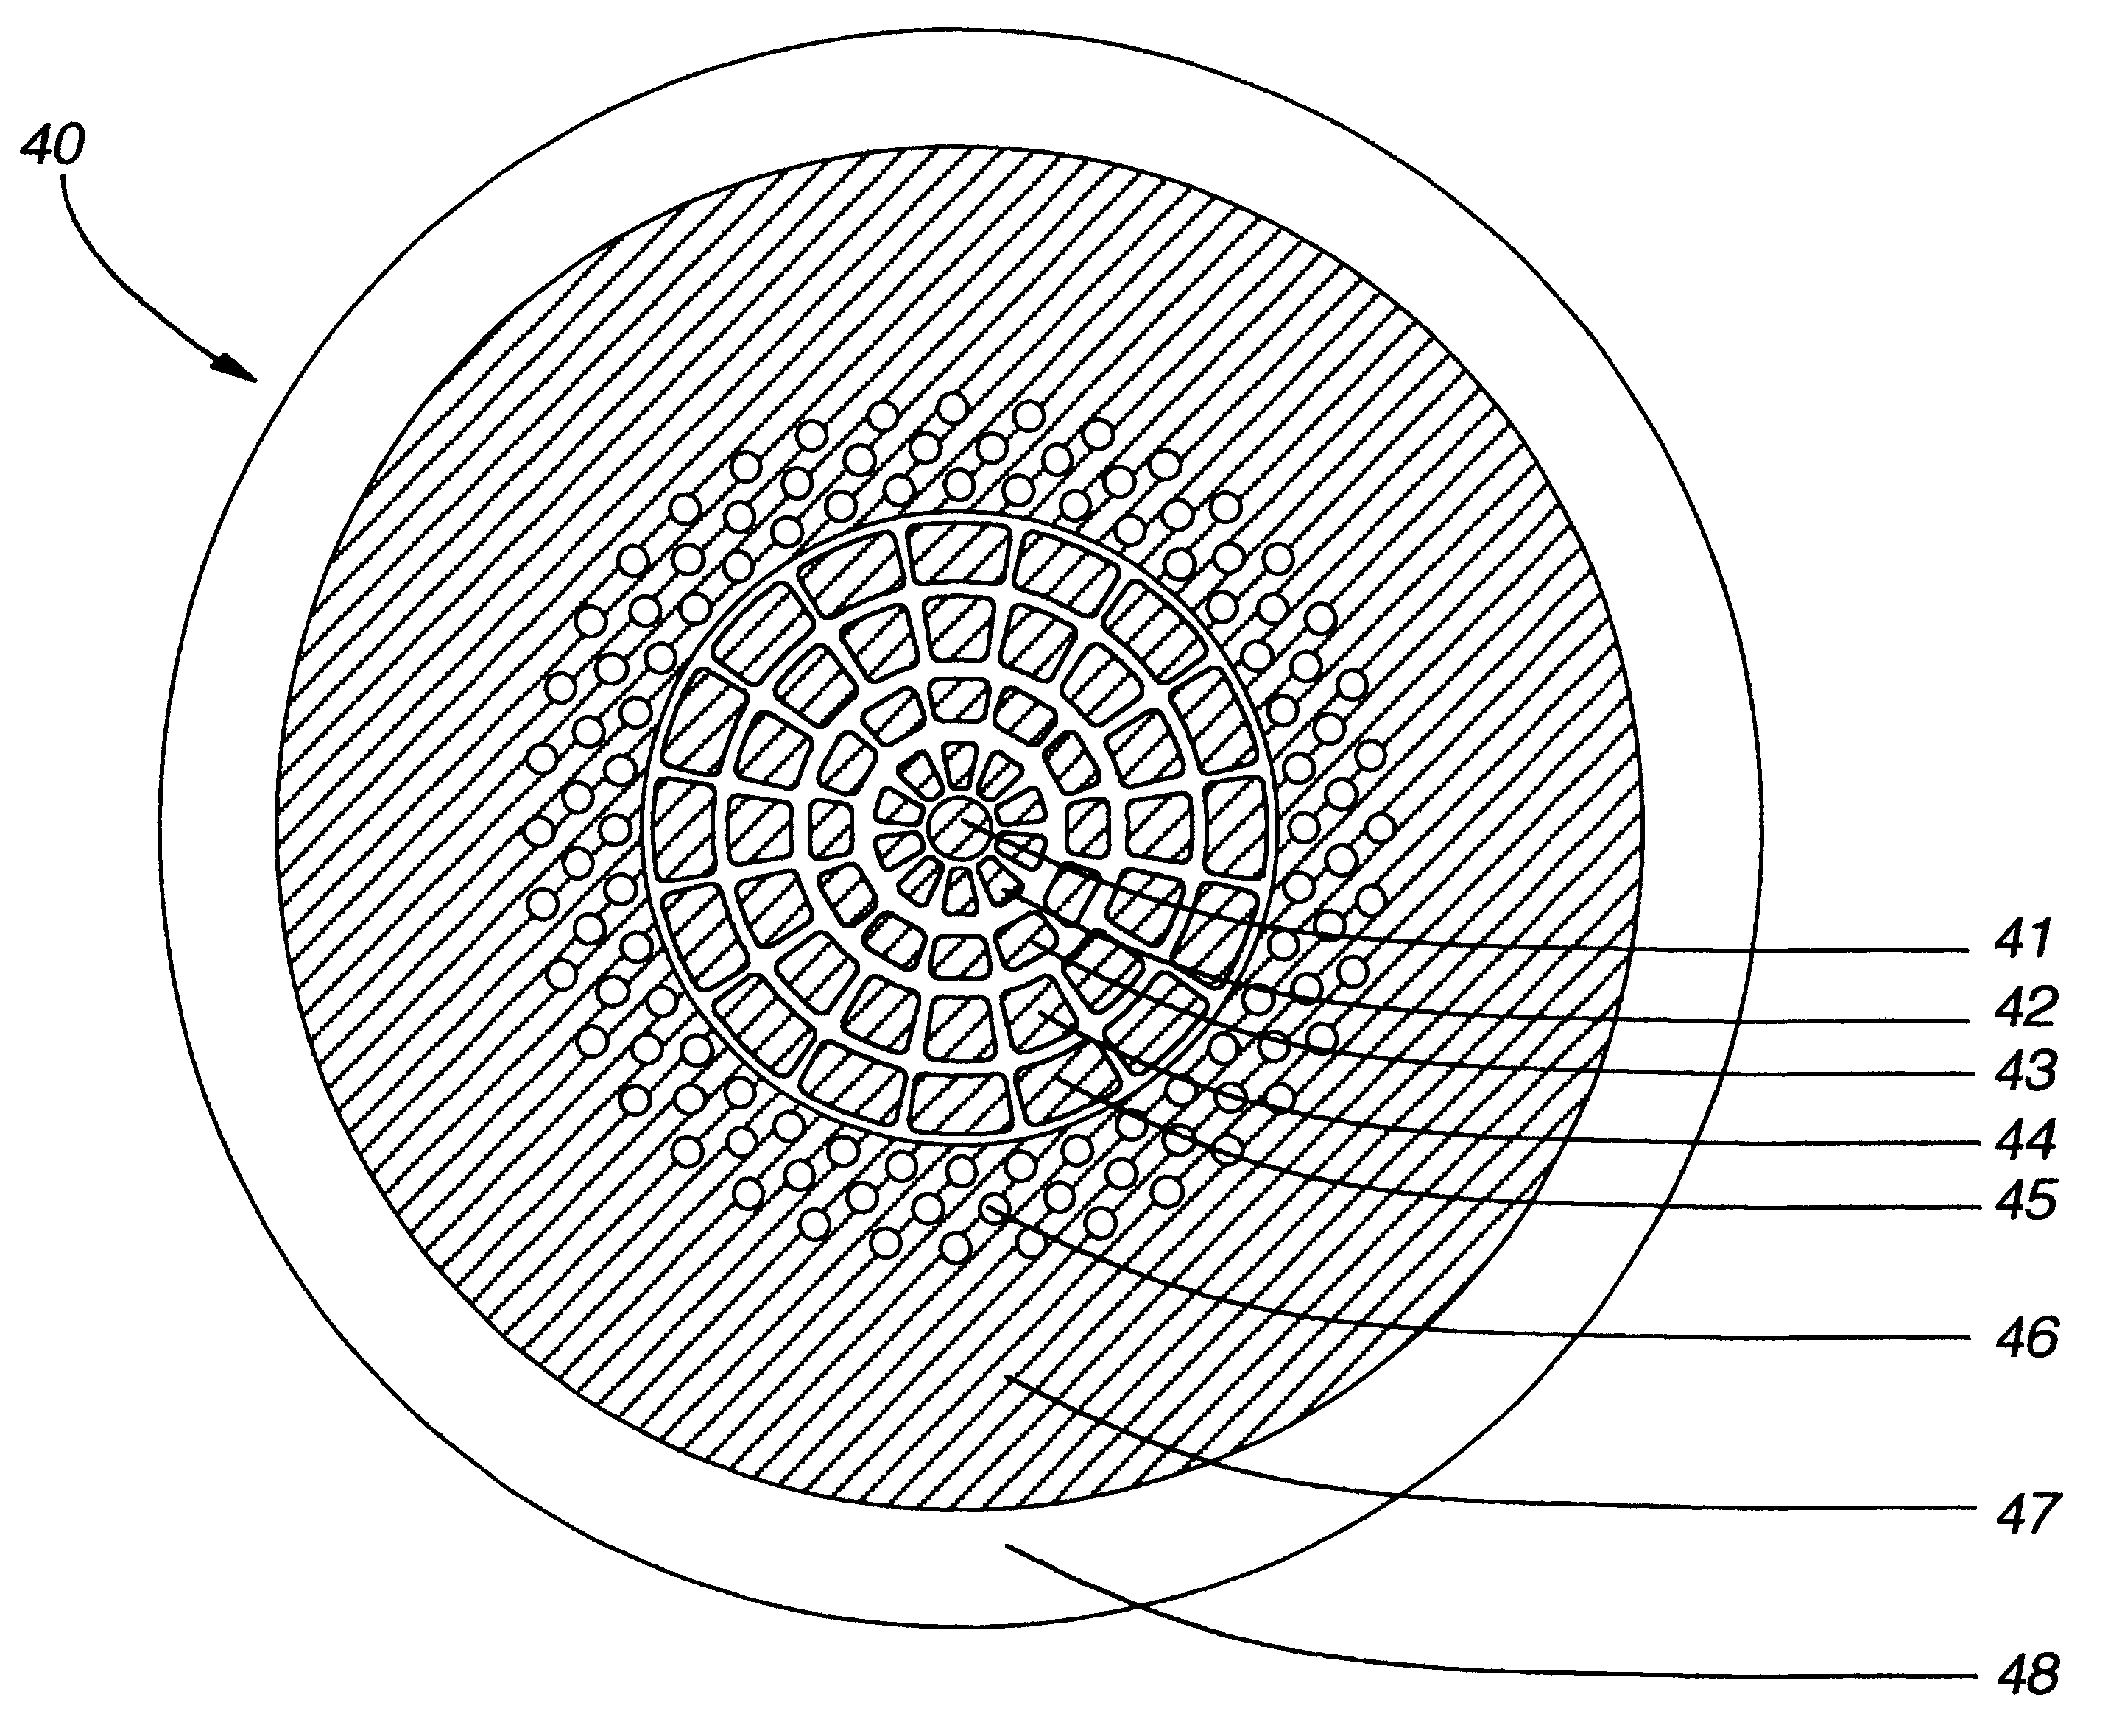 Patterned microwave susceptor element and microwave container incorporating same